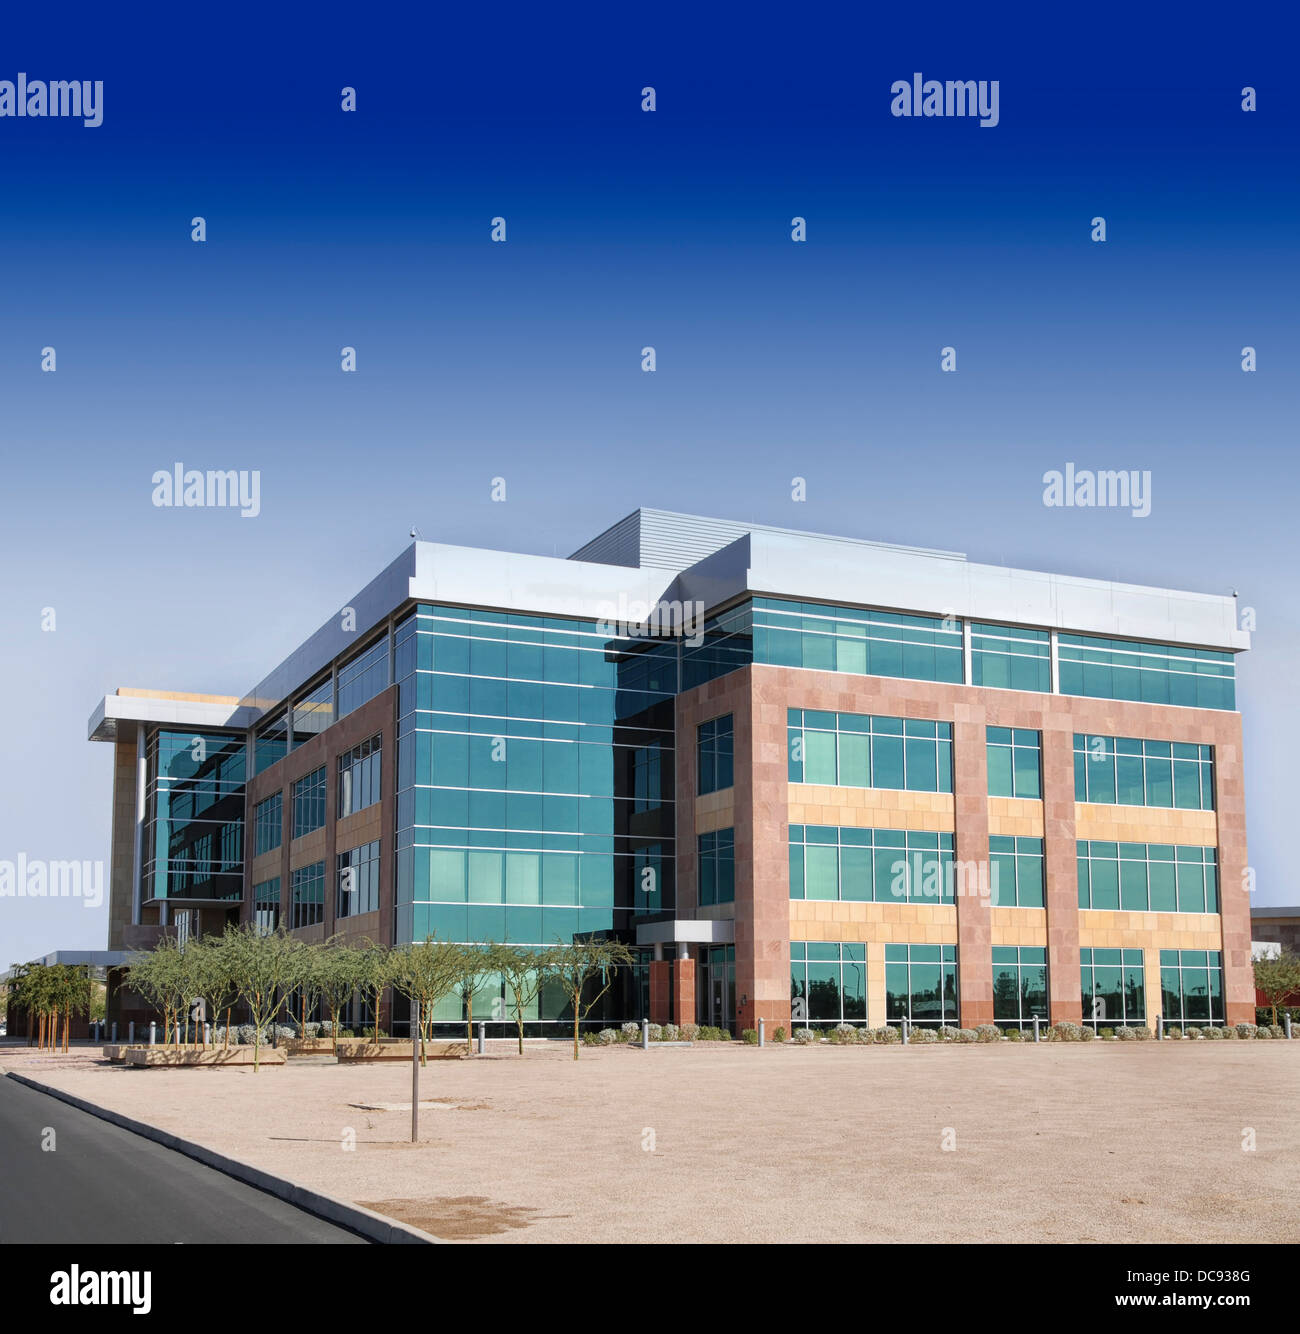 New modern large office building Stock Photo